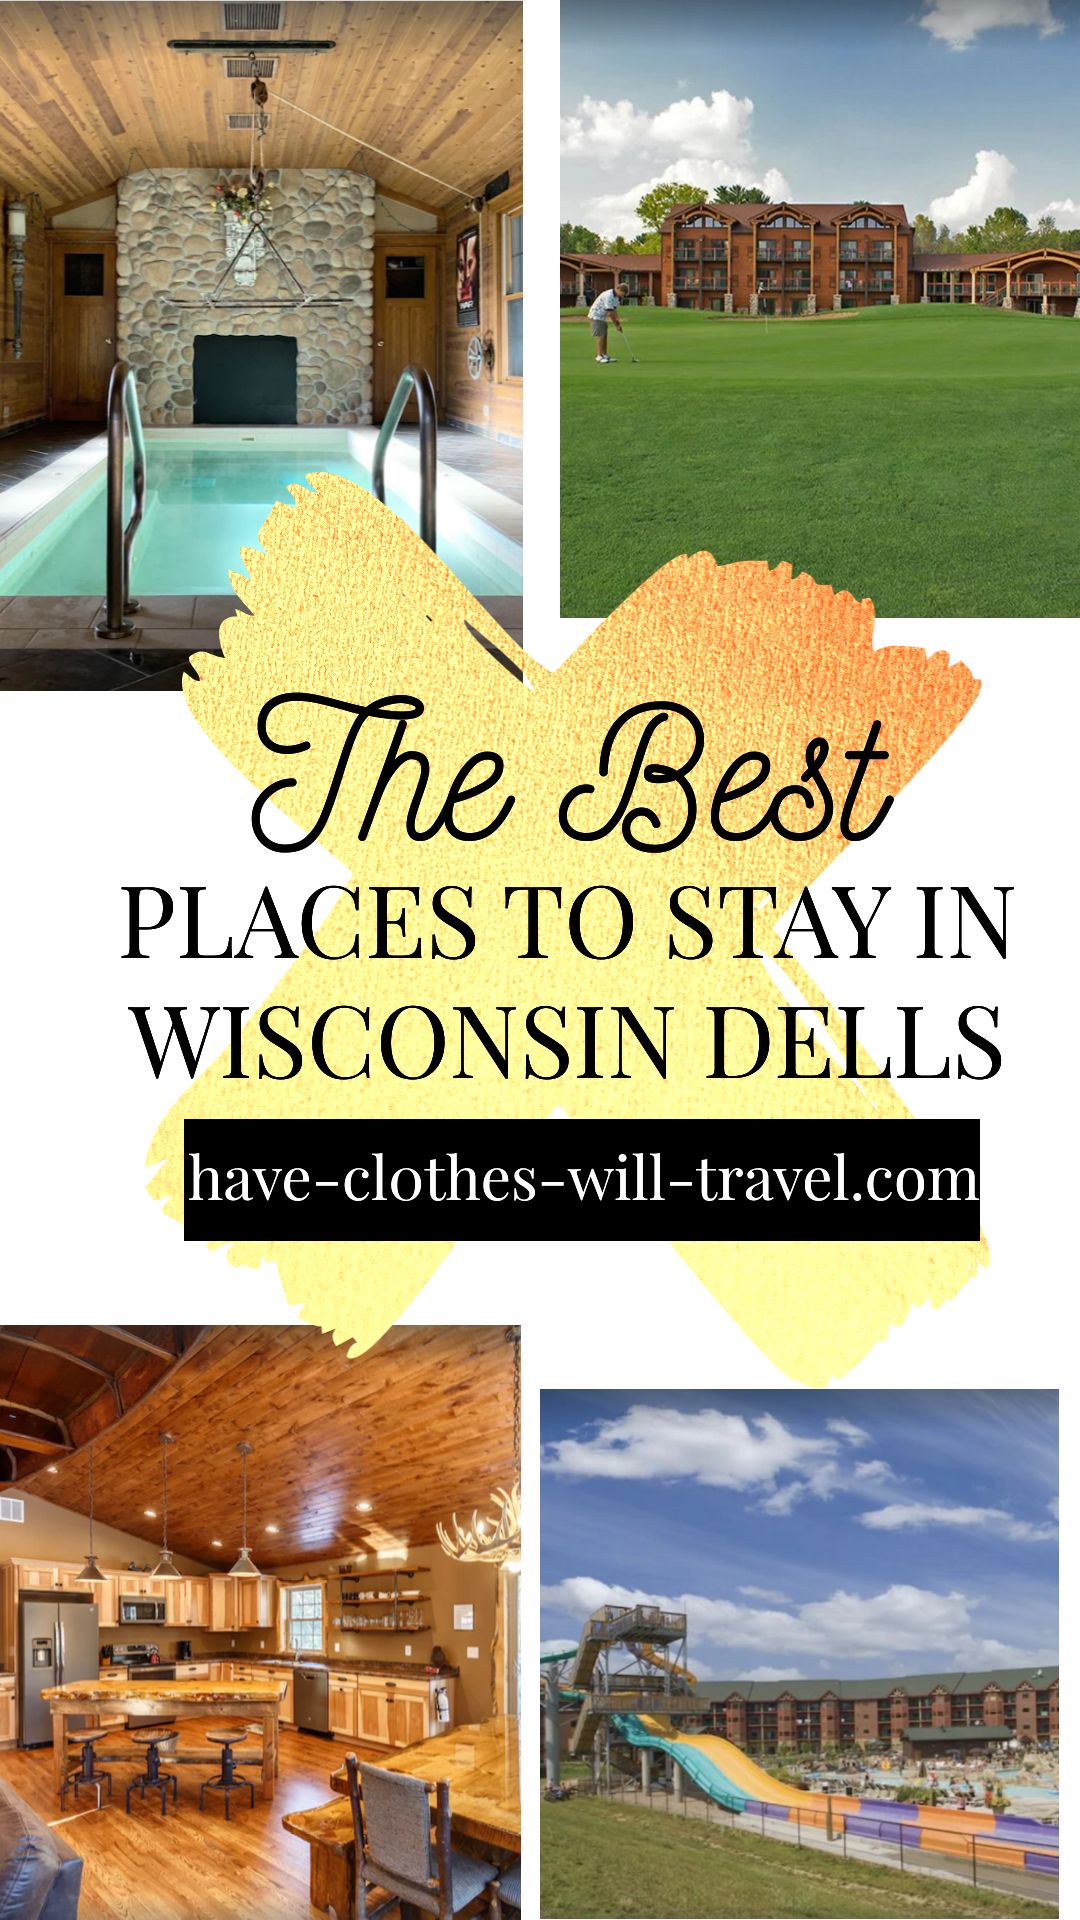 A collage of four images from different vacation rentals in the Wisconsin Dells, with amenities like private pools, golf course, arcades, and more. Text across the center of the image reads "the best places to stay in the Wisconsin Dells"